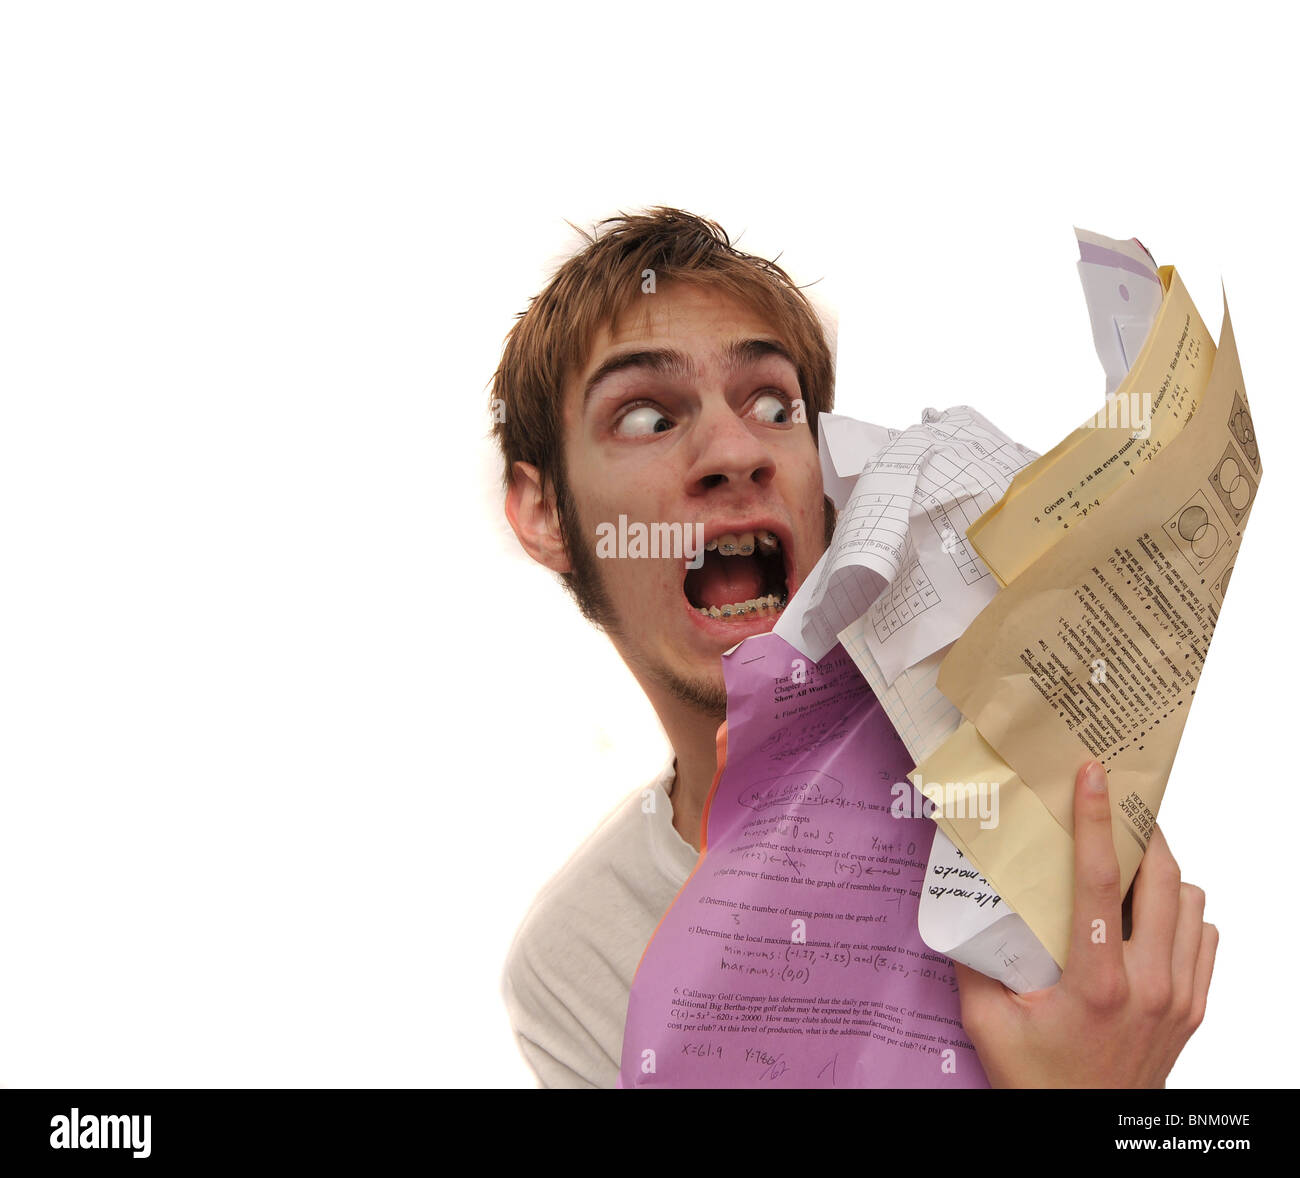 Man being attacked by an overload of paperwork! Stock Photo